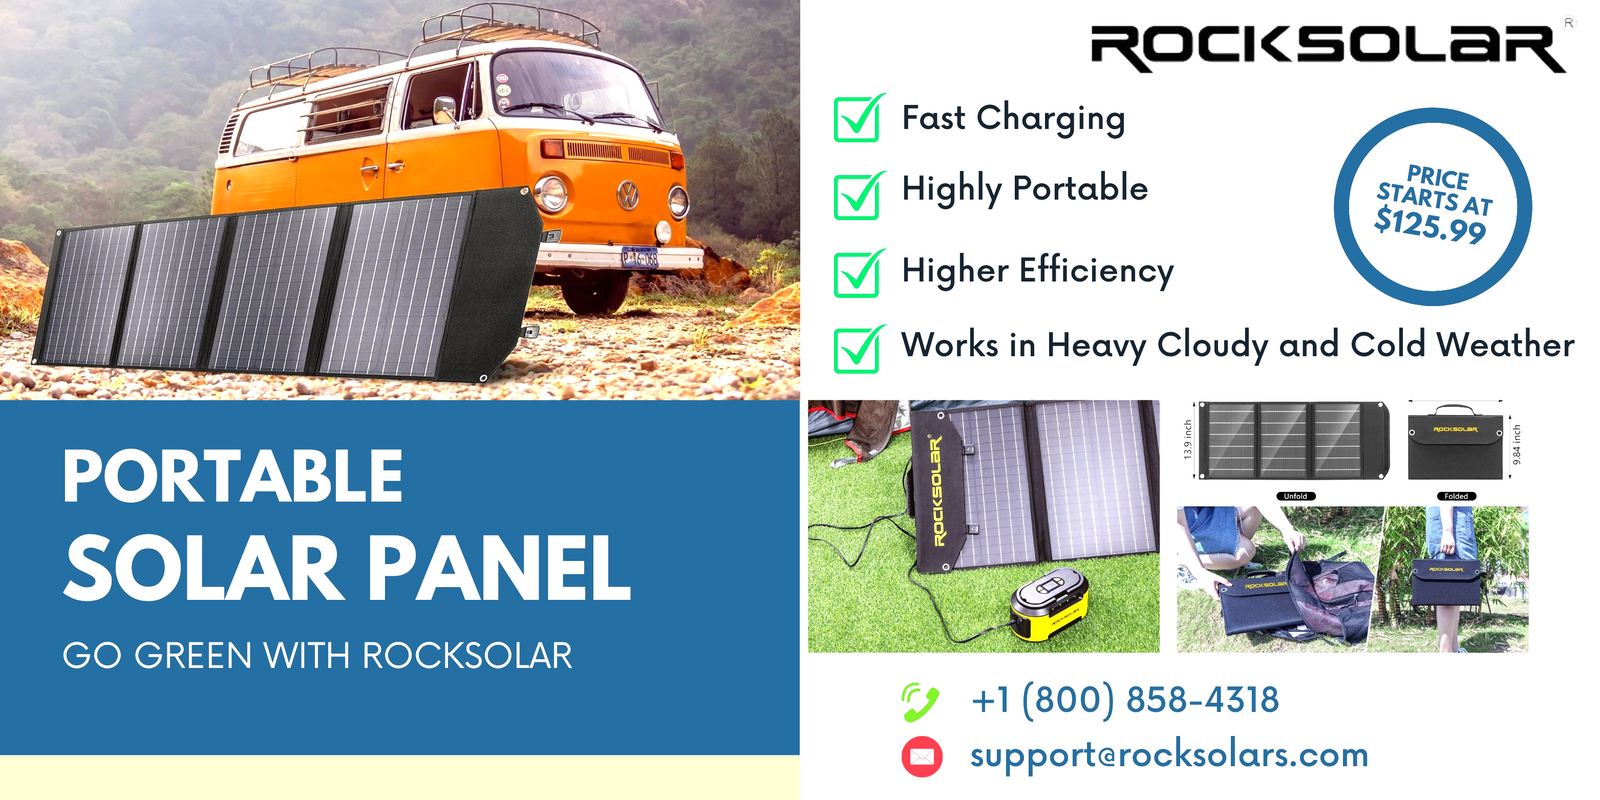 How can you use a portable solar panel?